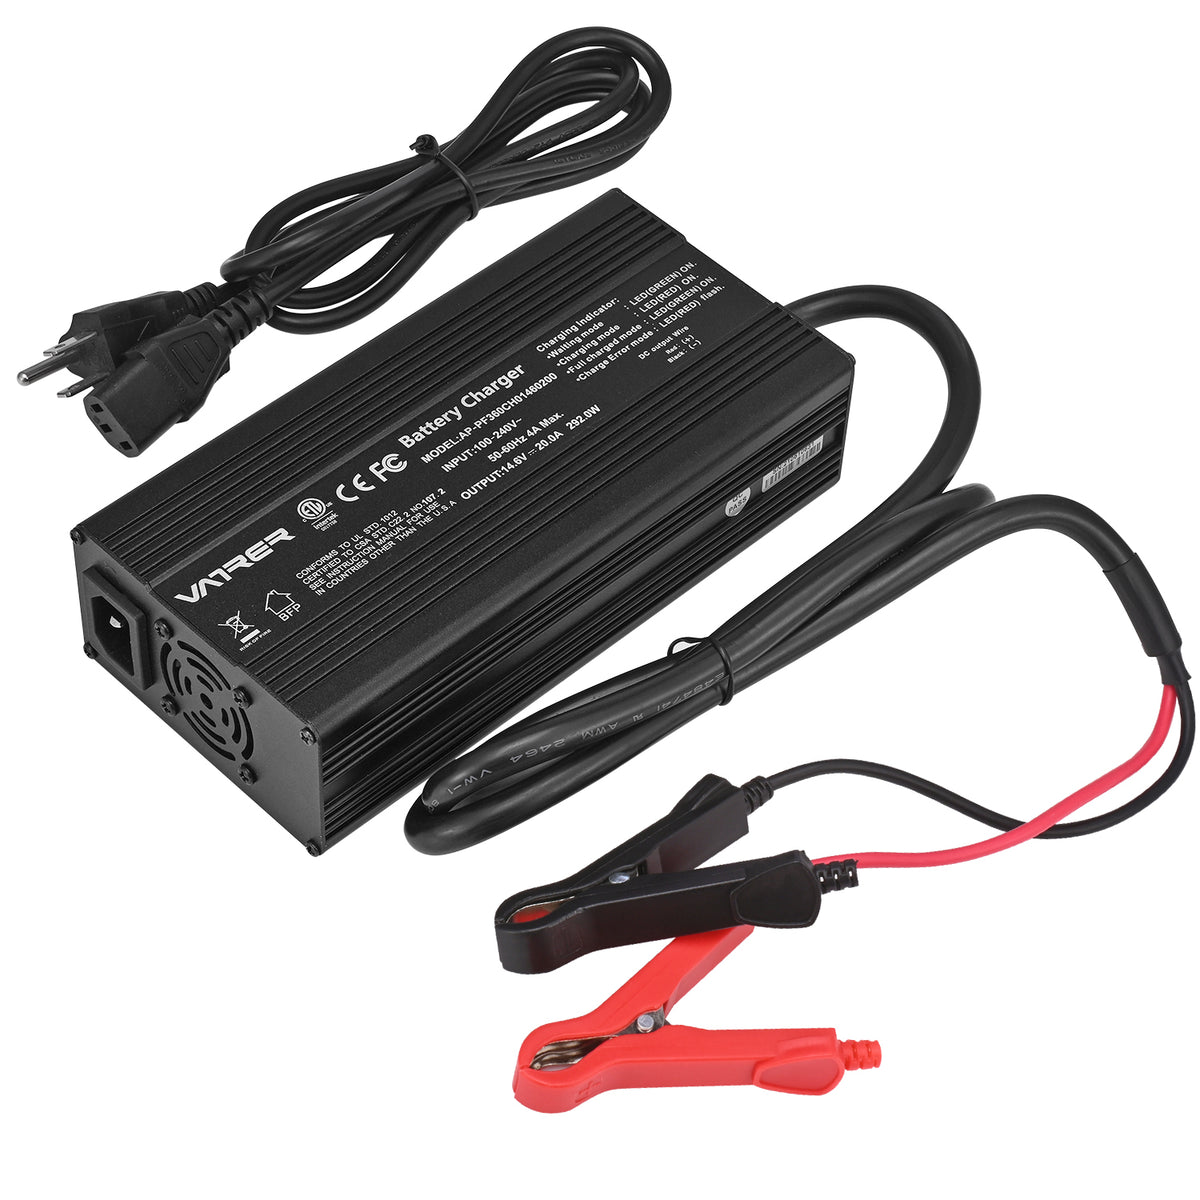 14.6V 20A Intelligent AC-DC 12V Lithium Iron Phosphate Battery Charger